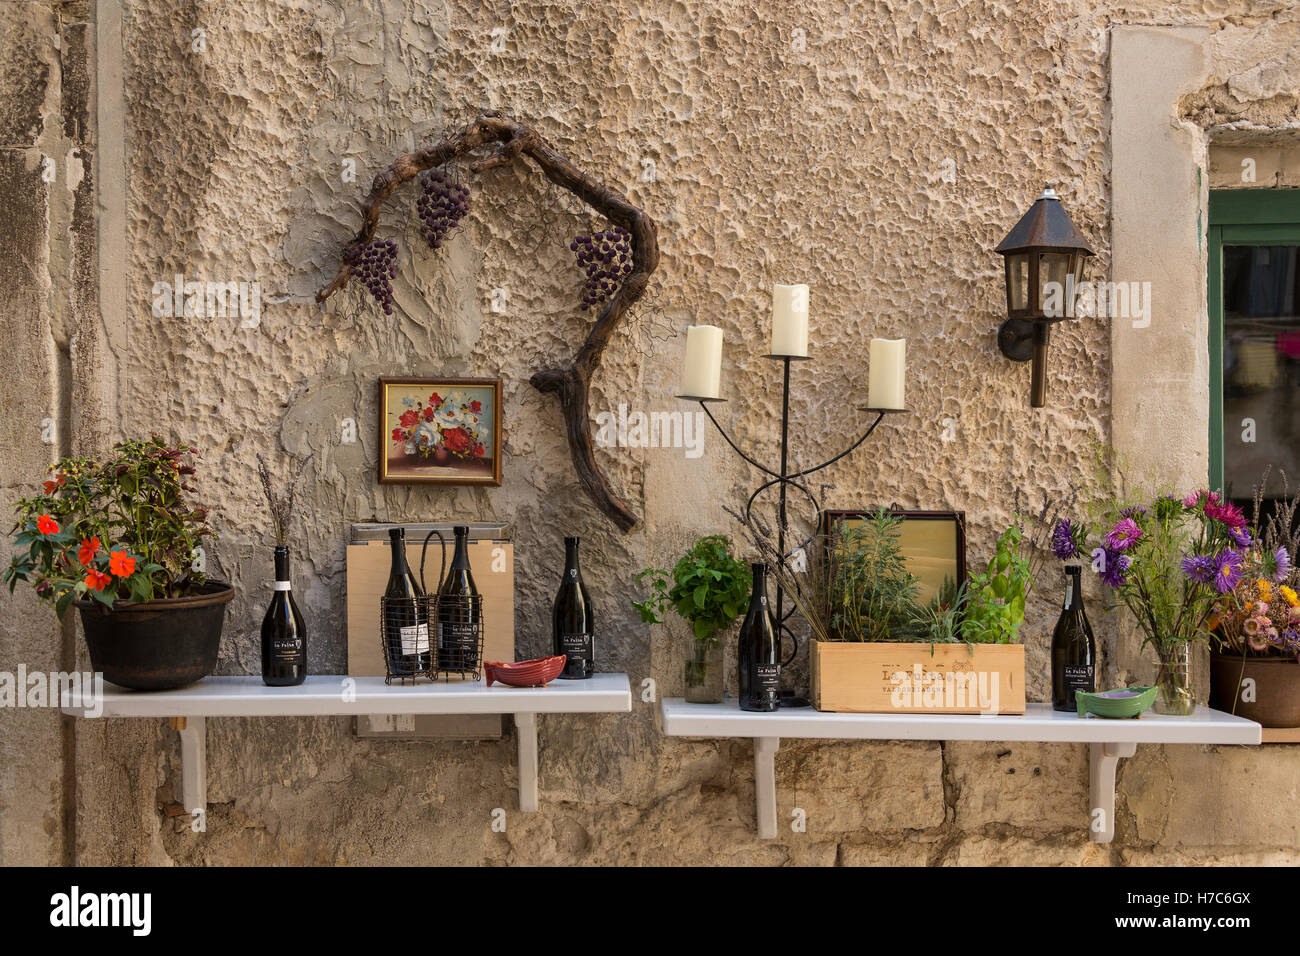 Mediterranean Still Life - A collection of picturesque rural bric-a-brac on the exterior wall of a village restaurant in the coa Stock Photo